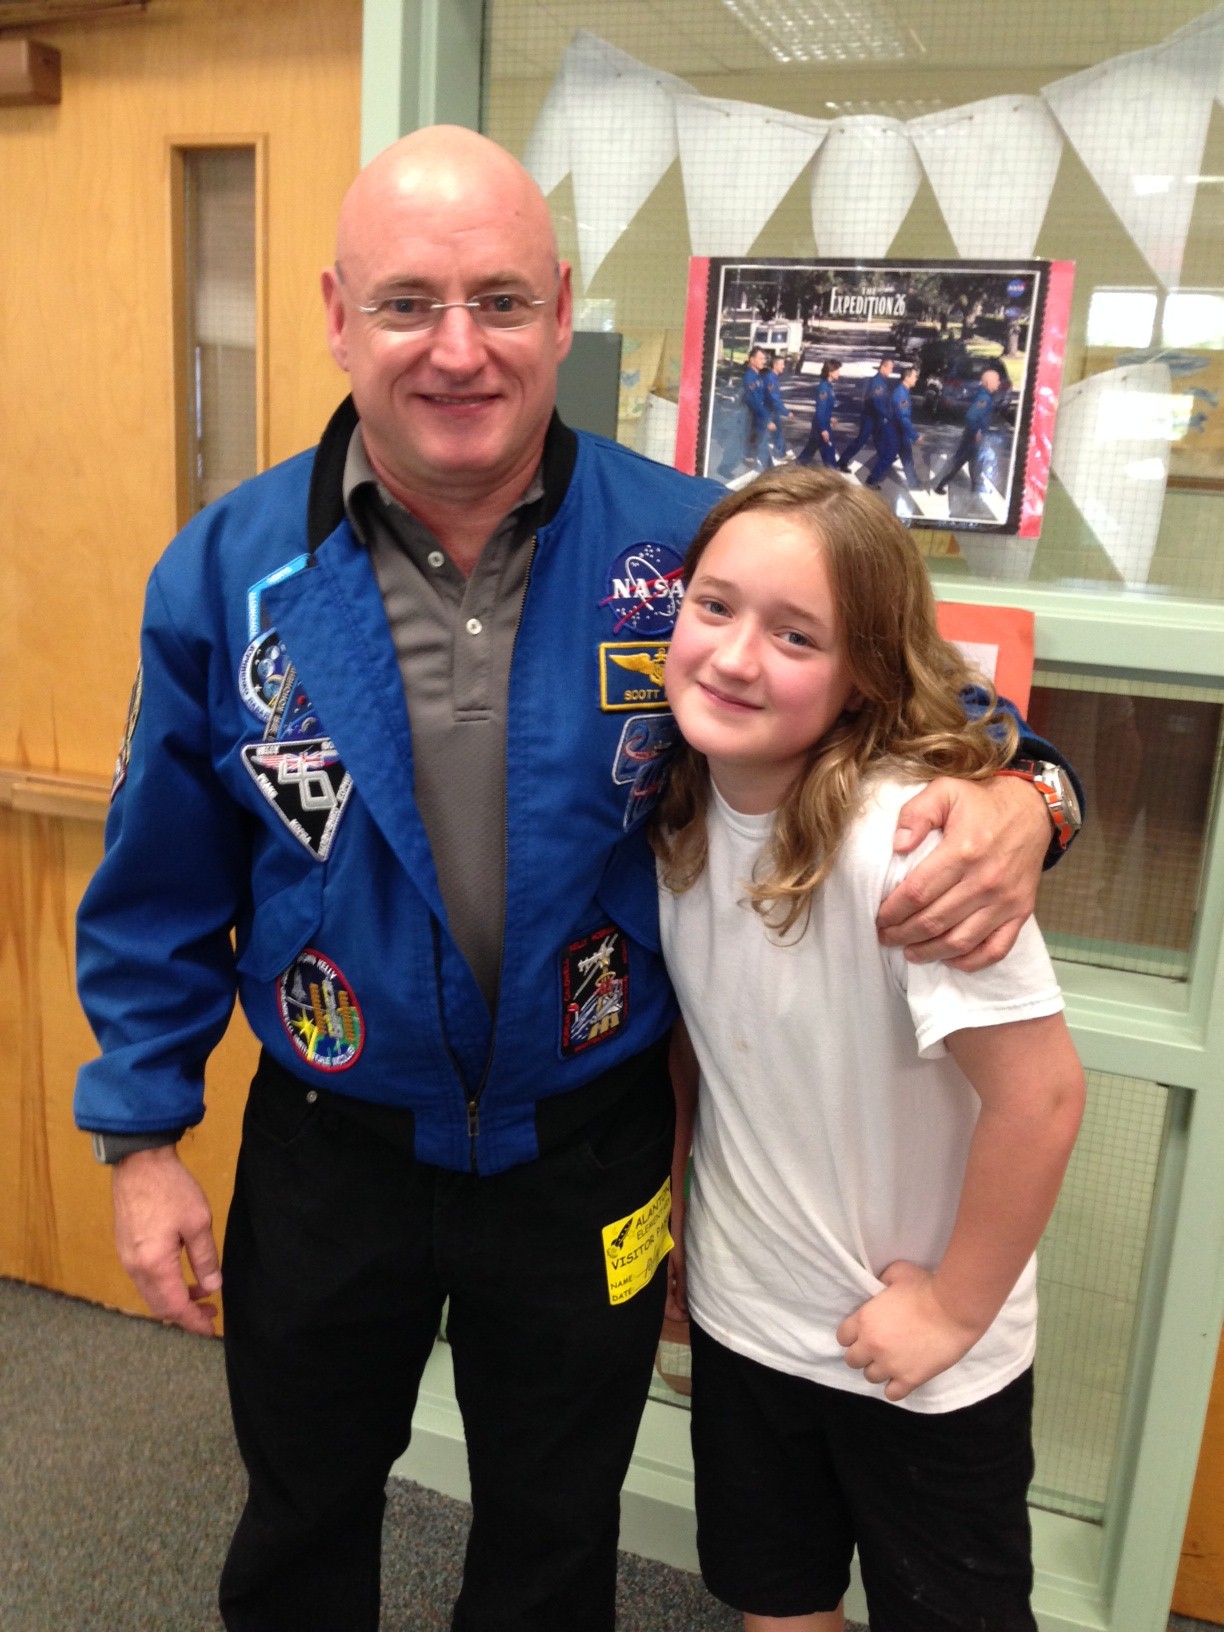 Kelly, takes a photo with his daughter, Charlotte, a student at Alanton Elementary. 